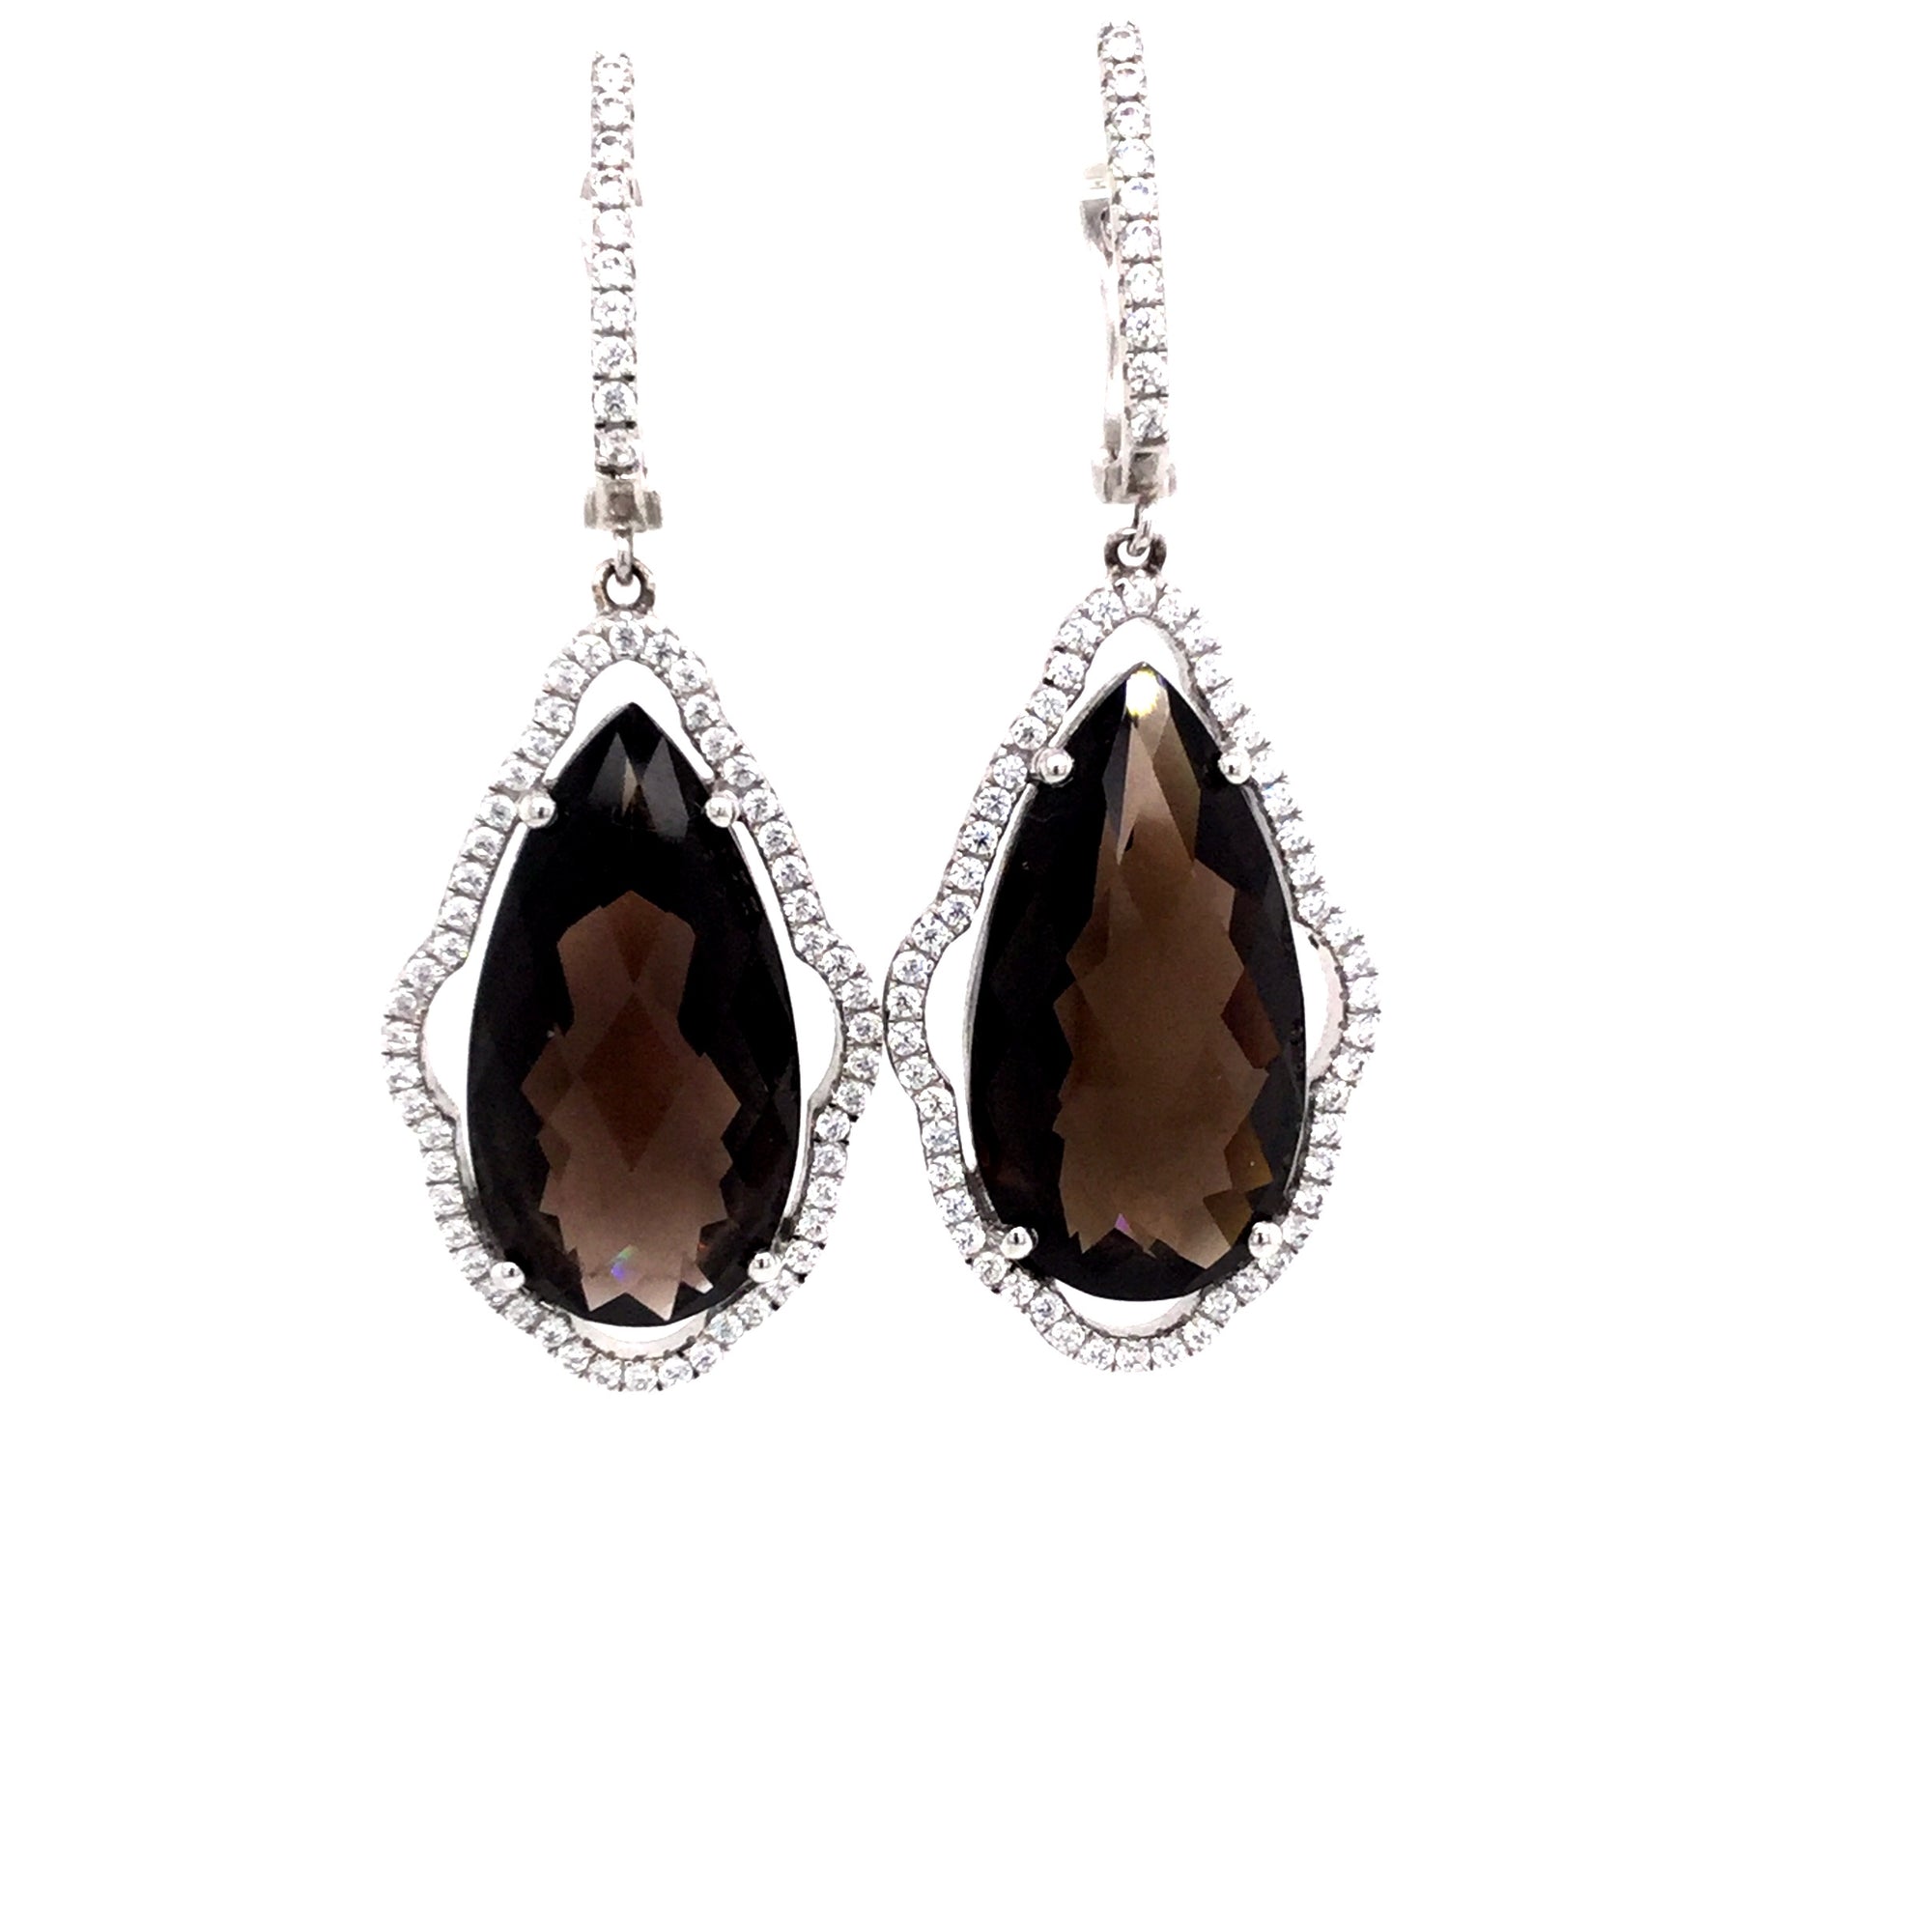 Sterling Silver Rhodium Plated Chandelier Earrings With Swarovski Crystals